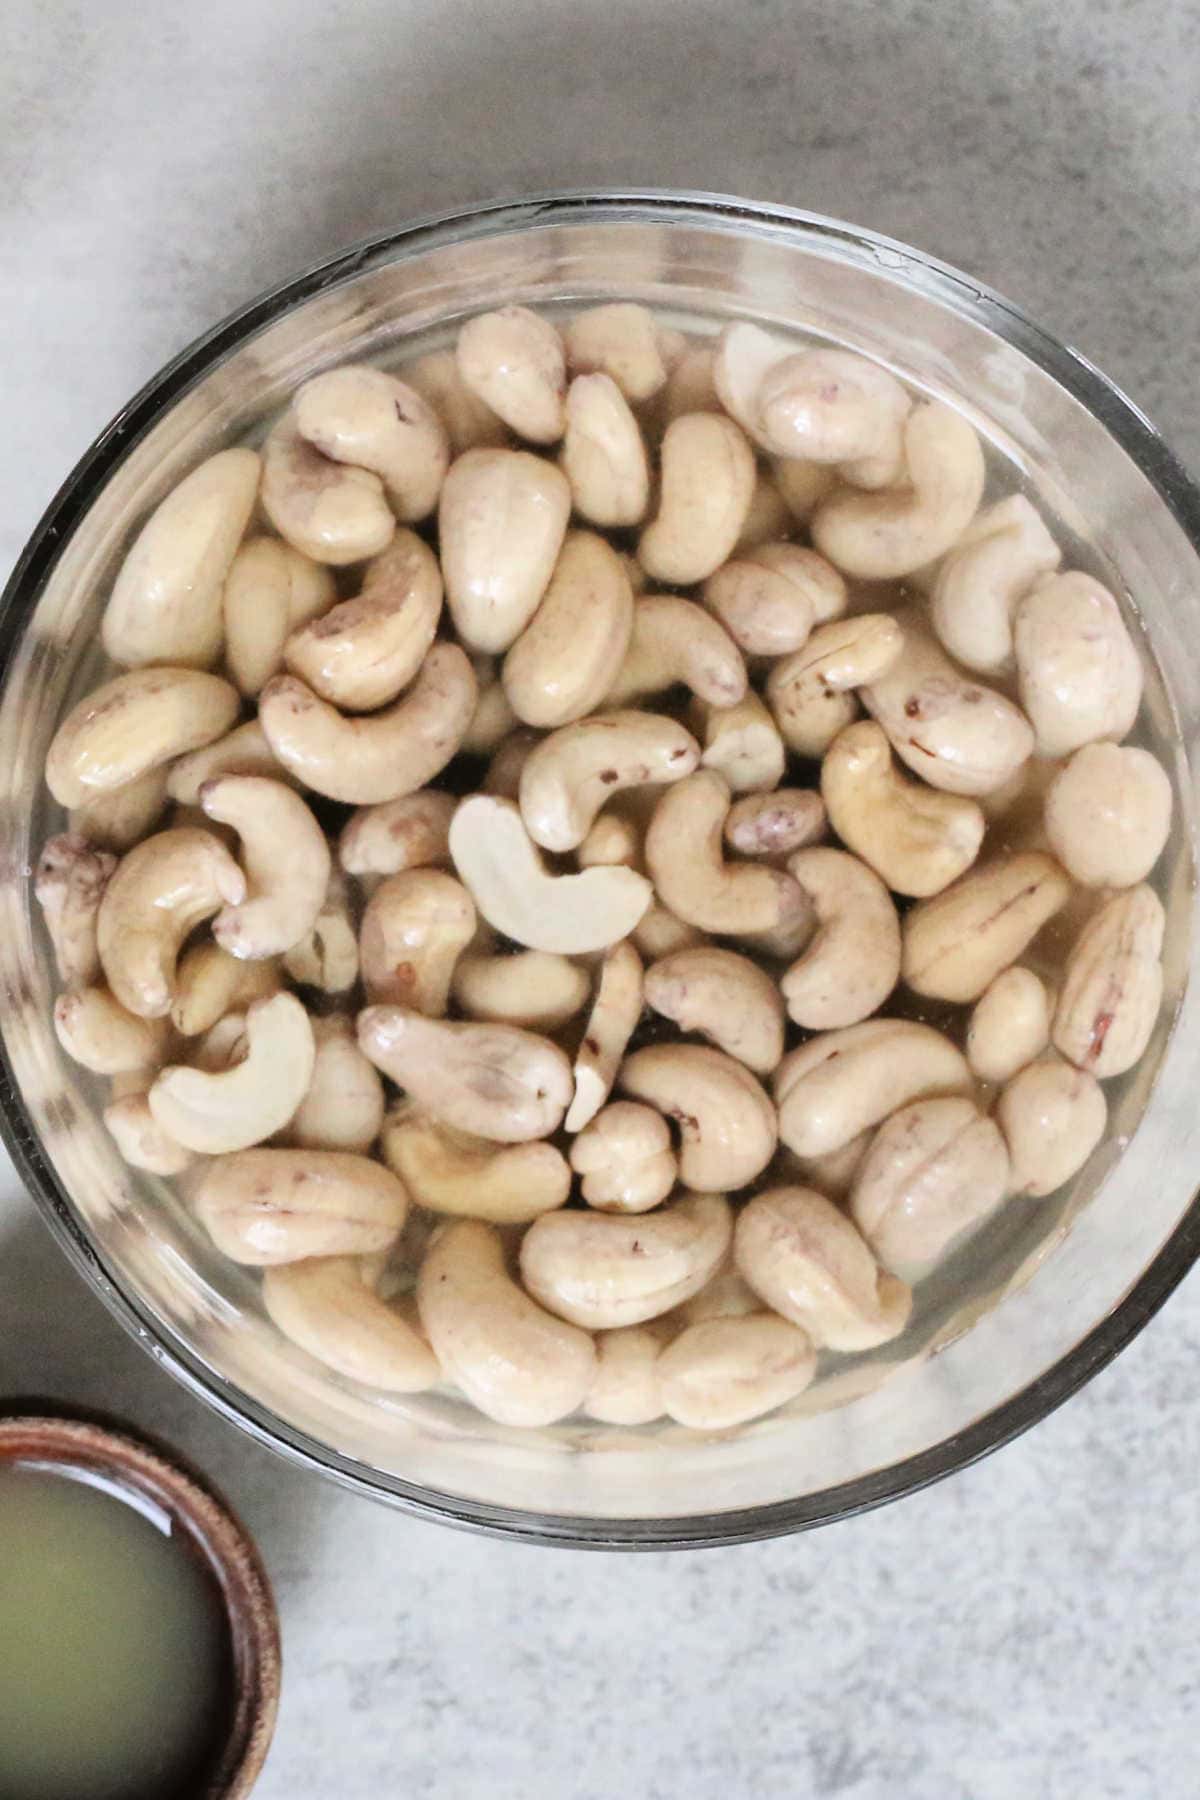 Unsalted Raw Cashew Nuts Soaking in Water